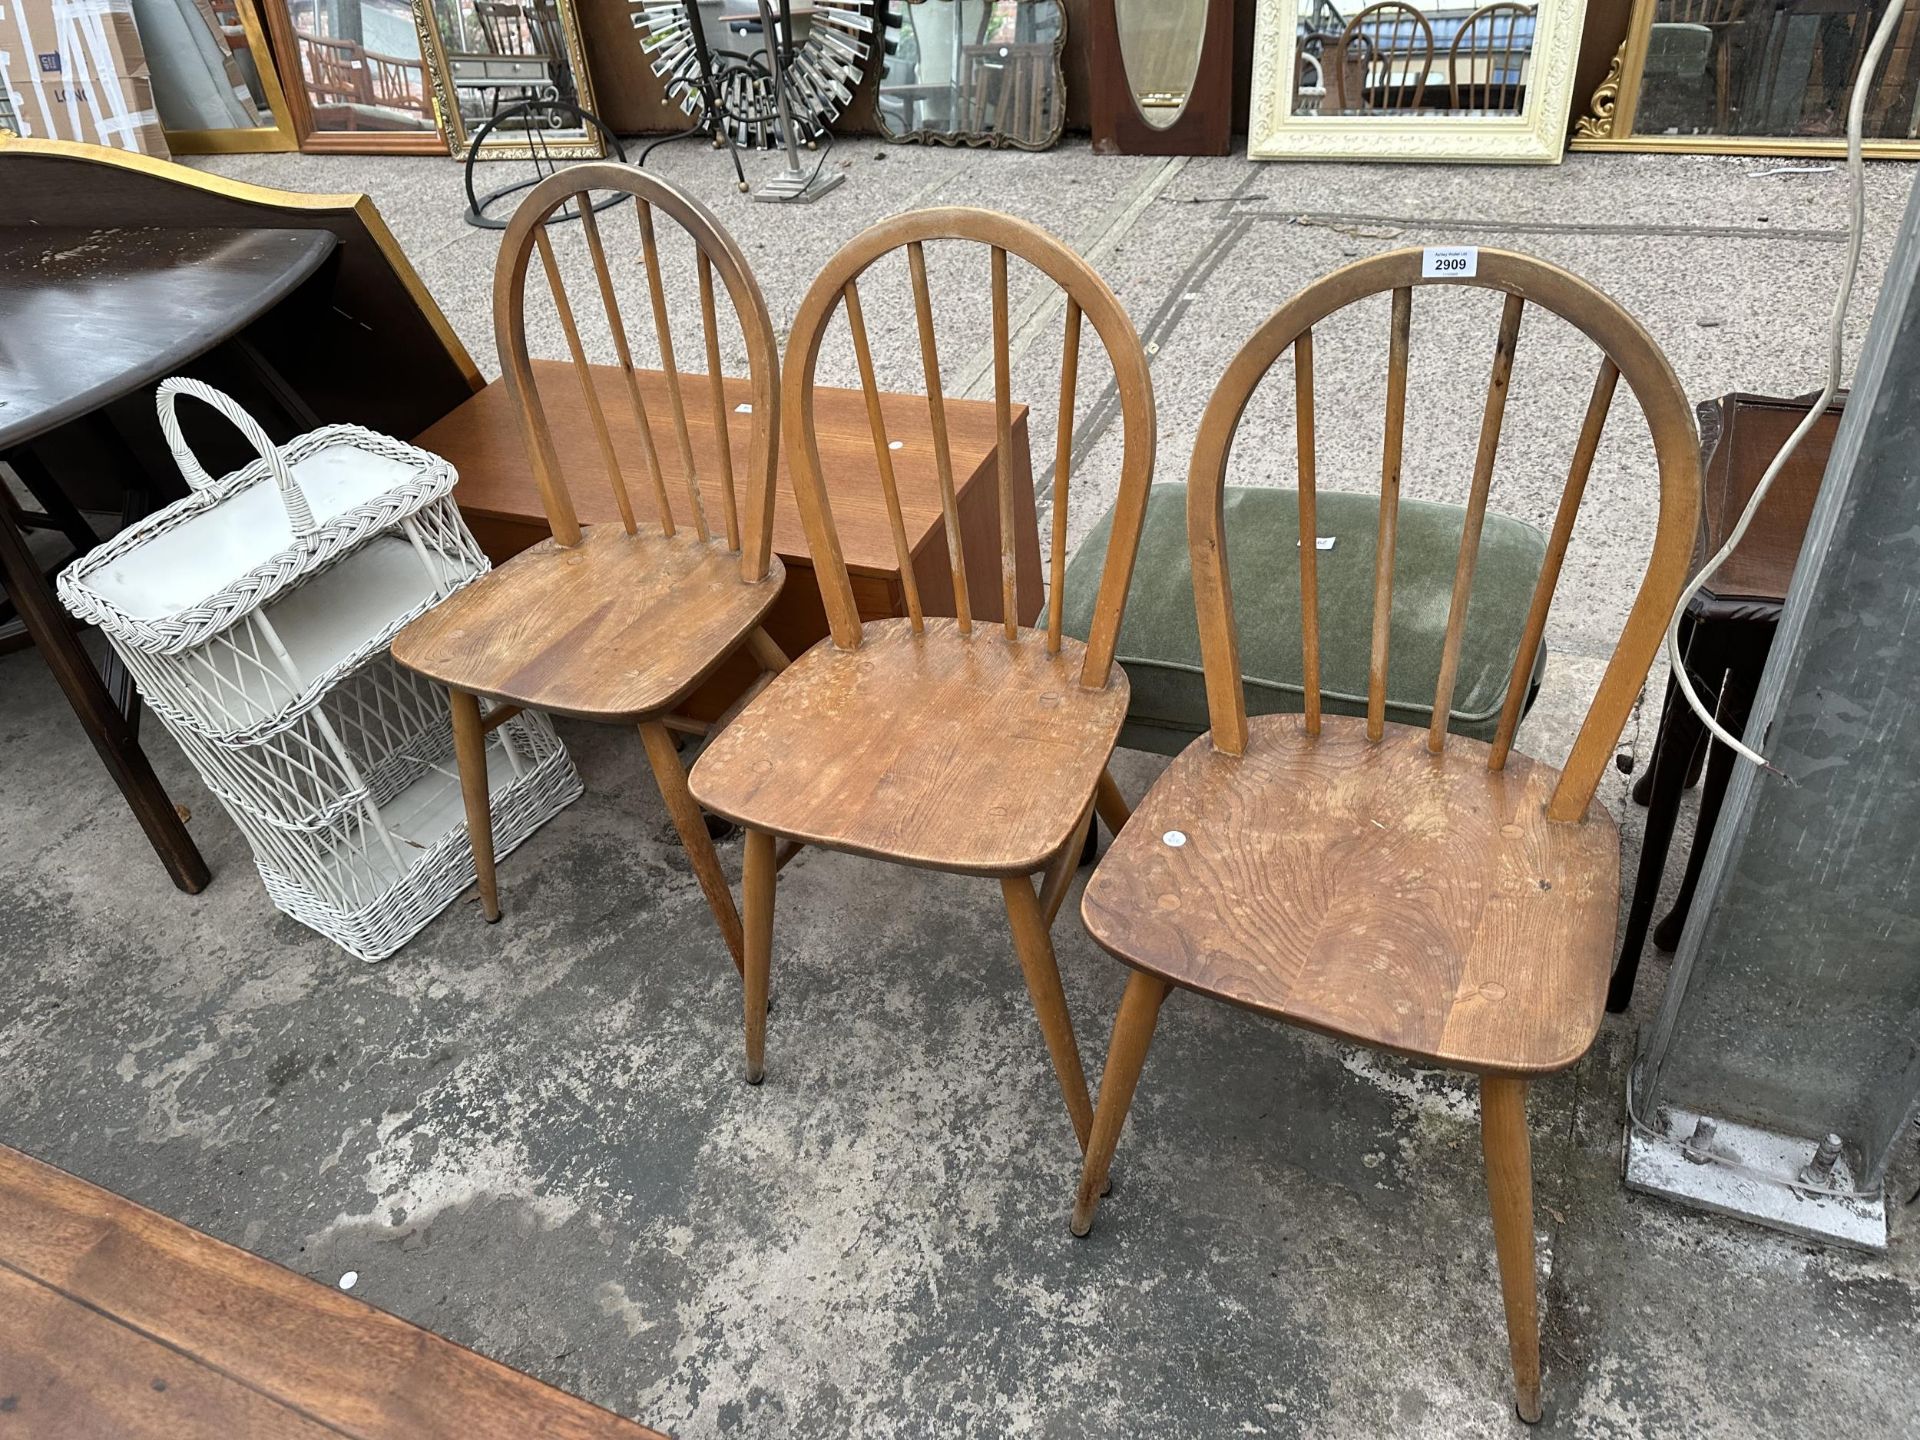 THREE ERCOL BLUE LABEL ELM AND BEECH WINDSOR STYLE CHAIRS AND WICKER SIX BOTTLE WINE CARRIER